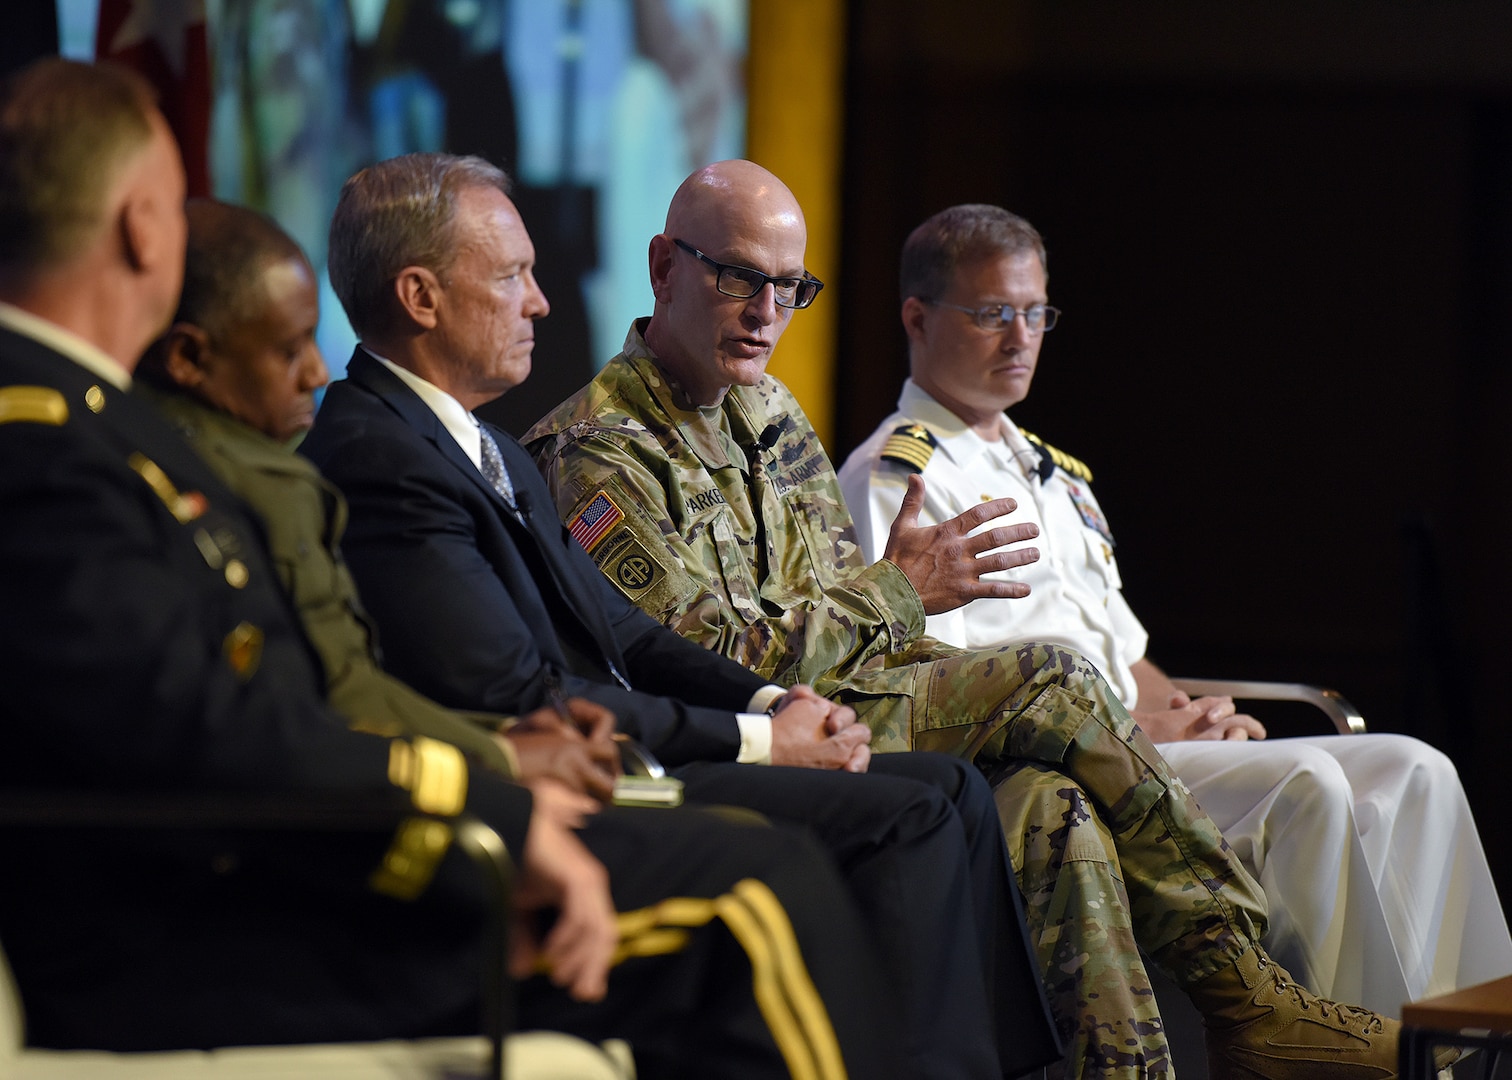 Brig. Gen. Chad J. Parker, National Guard Bureau director of intelligence, second from right, discusses the importance of information sharing during an emergency response during the Defense Intelligence Agency DoDIIS Worldwide Conference Directors of Intelligence panel discussion, Aug. 21, 2019, at the Tampa Convention Center, in Florida.